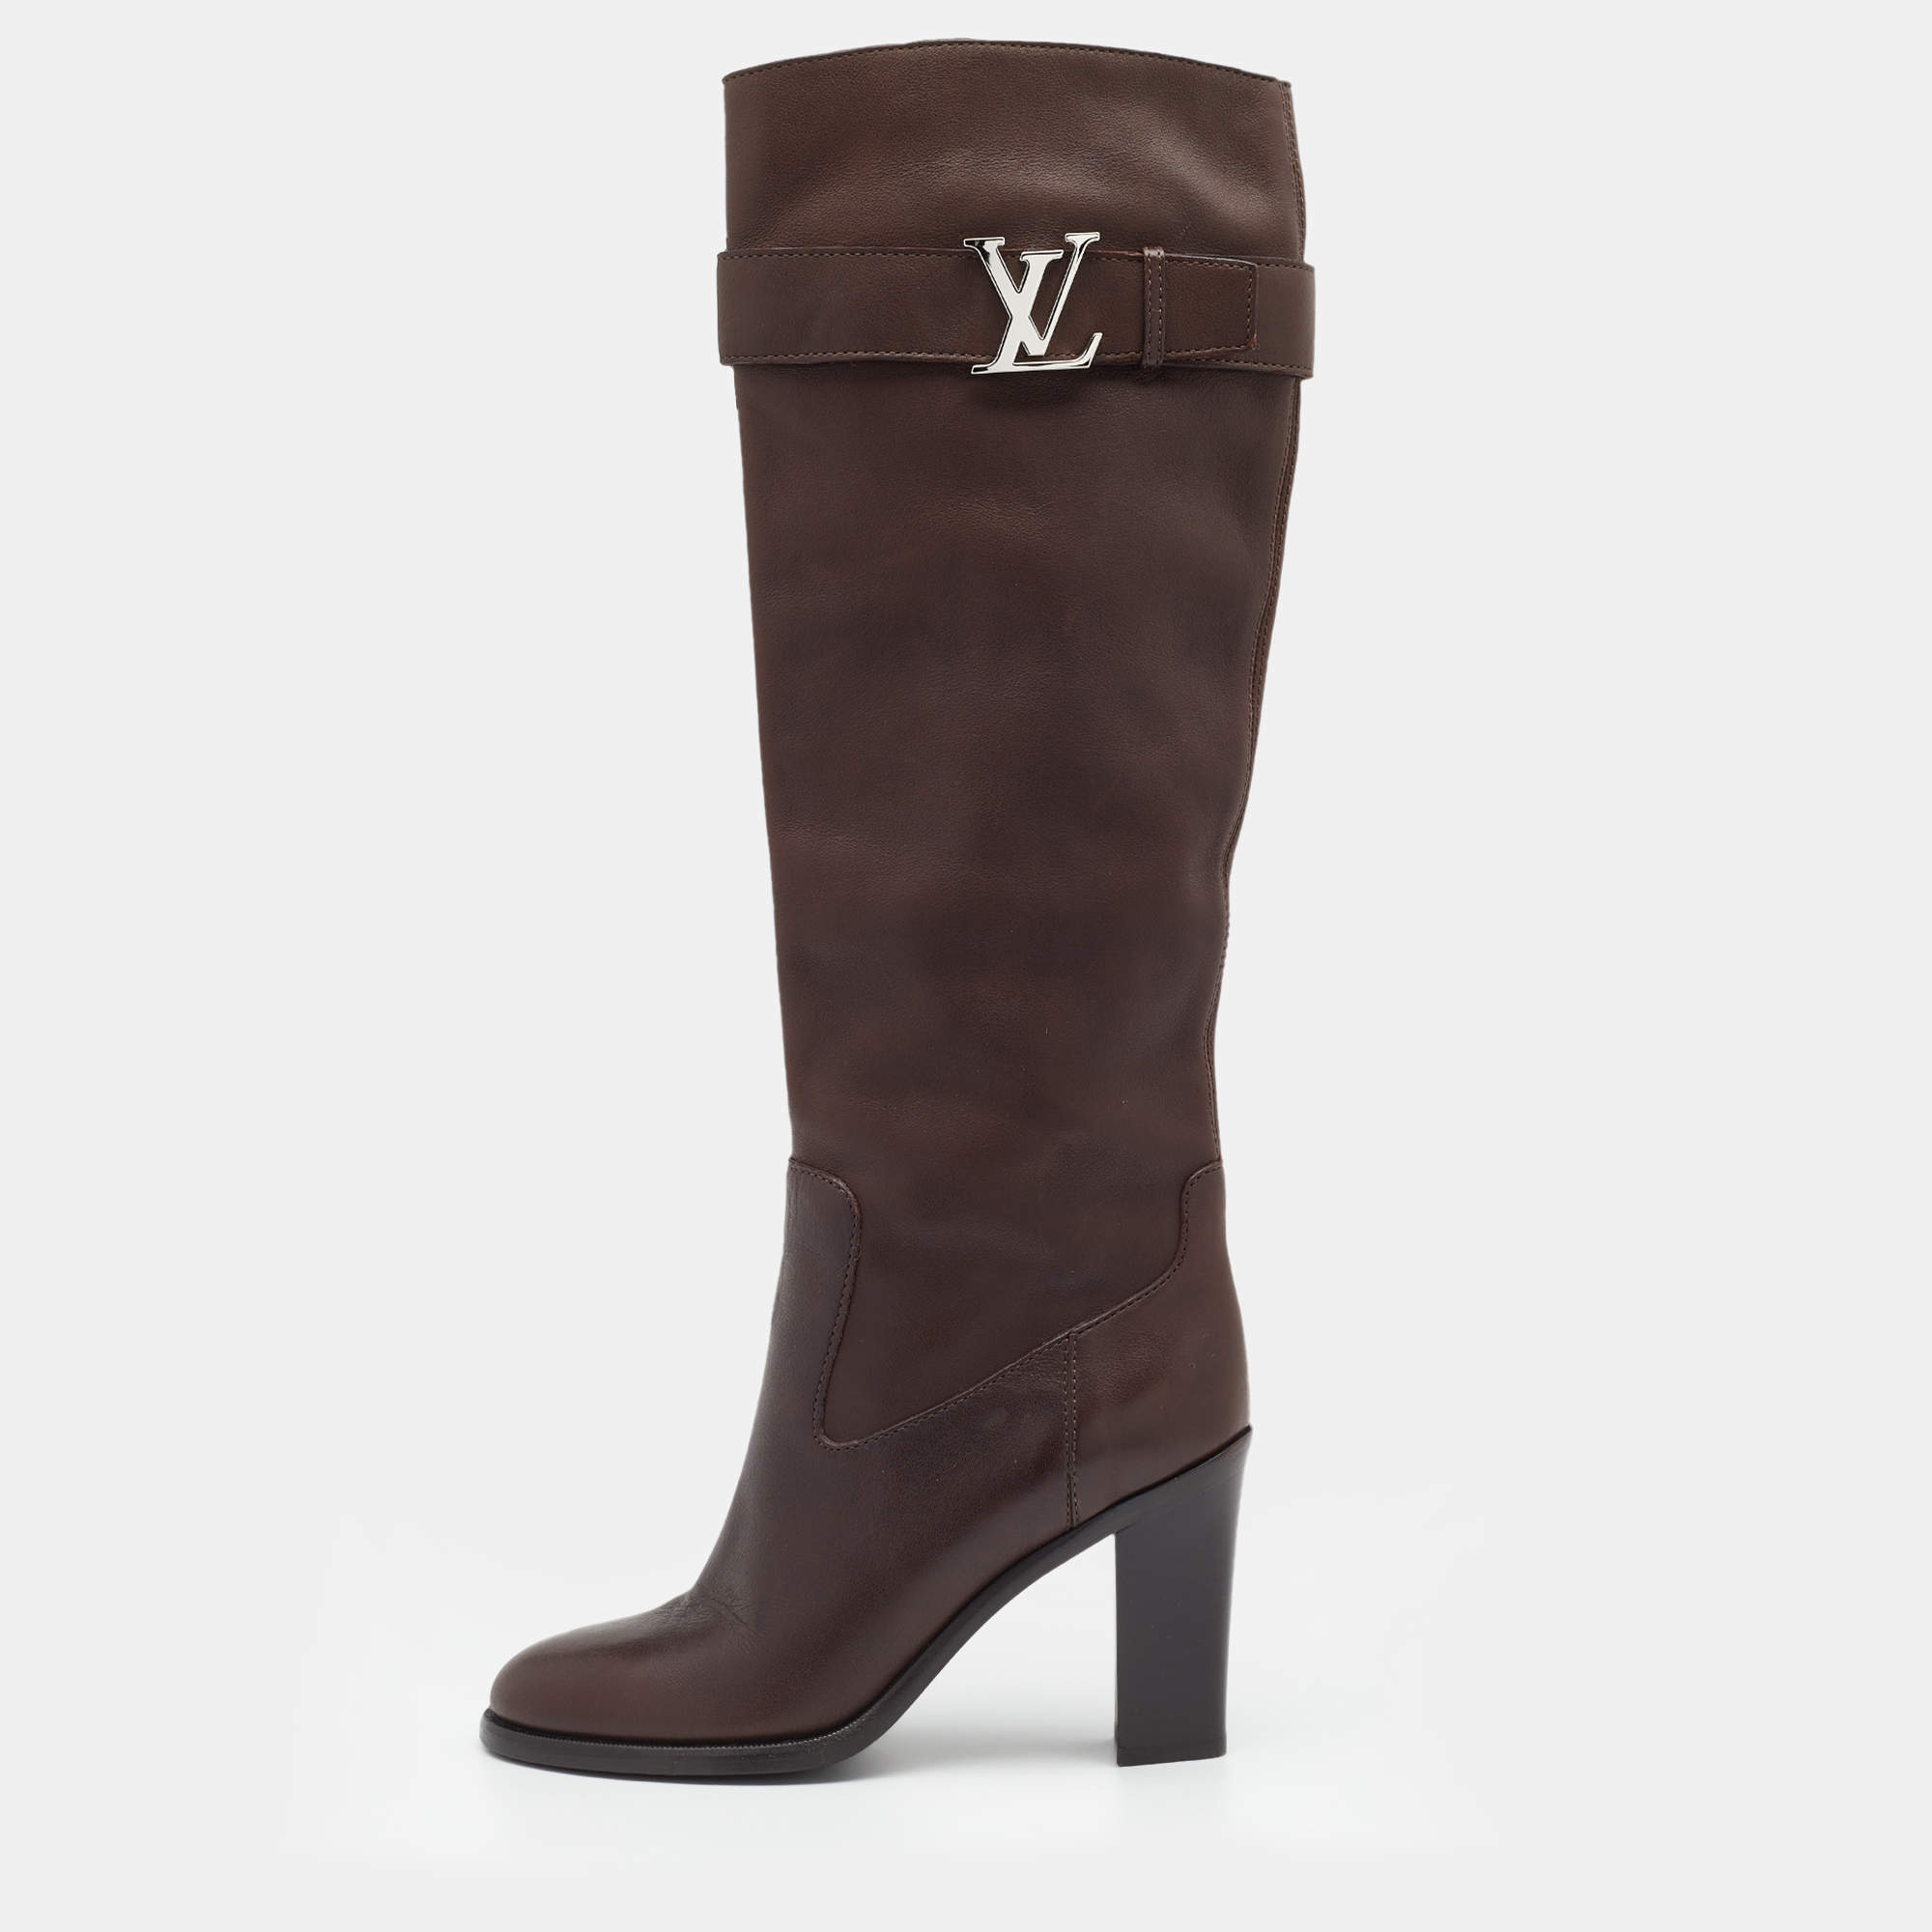 LOUIS VUITTON Brown Multi MA0137 Women's Boots Used 231005N